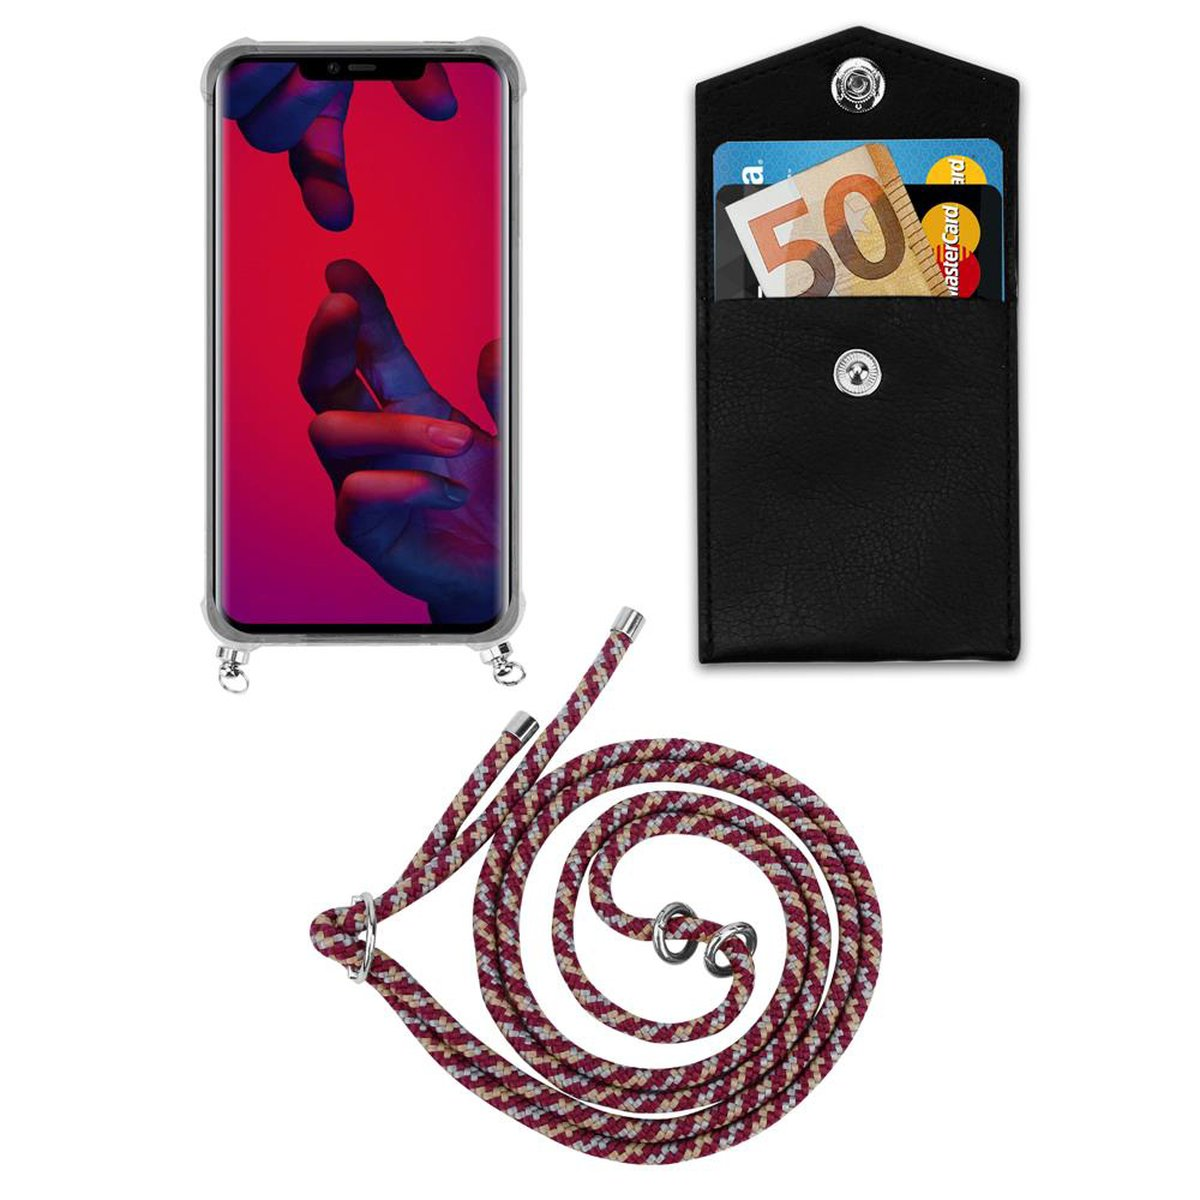 abnehmbarer Hülle, Kordel Band Silber 20 WEIß CADORABO Huawei, GELB MATE mit Kette Handy PRO, ROT und Backcover, Ringen,